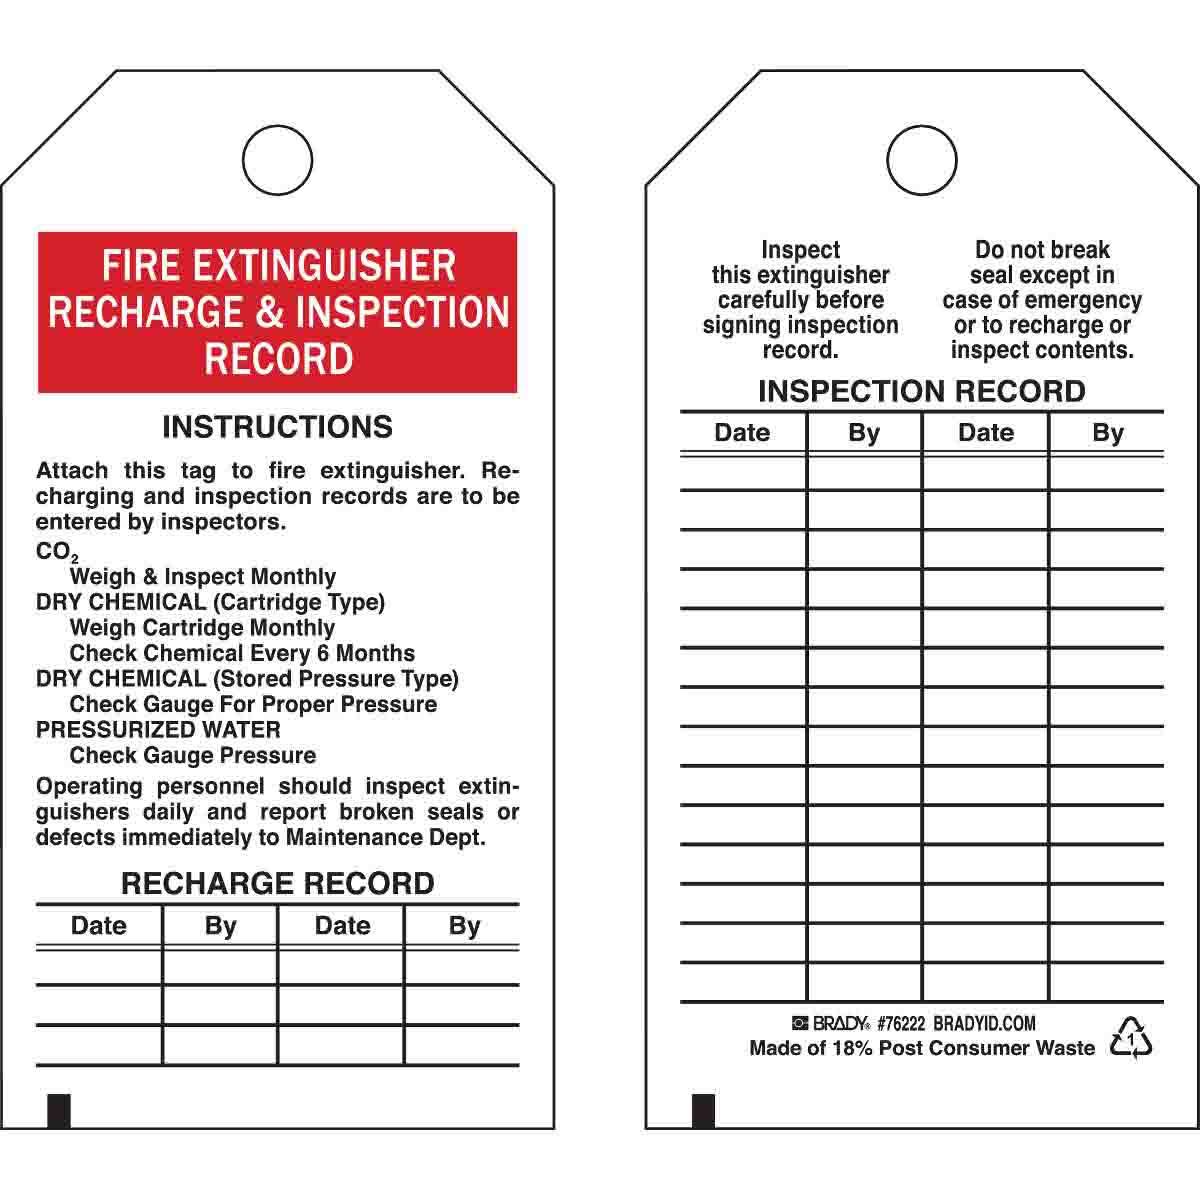 Fire Extinguisher Recharge And Inspection Record Tags Brady Part 76222 Brady Bradyid Com